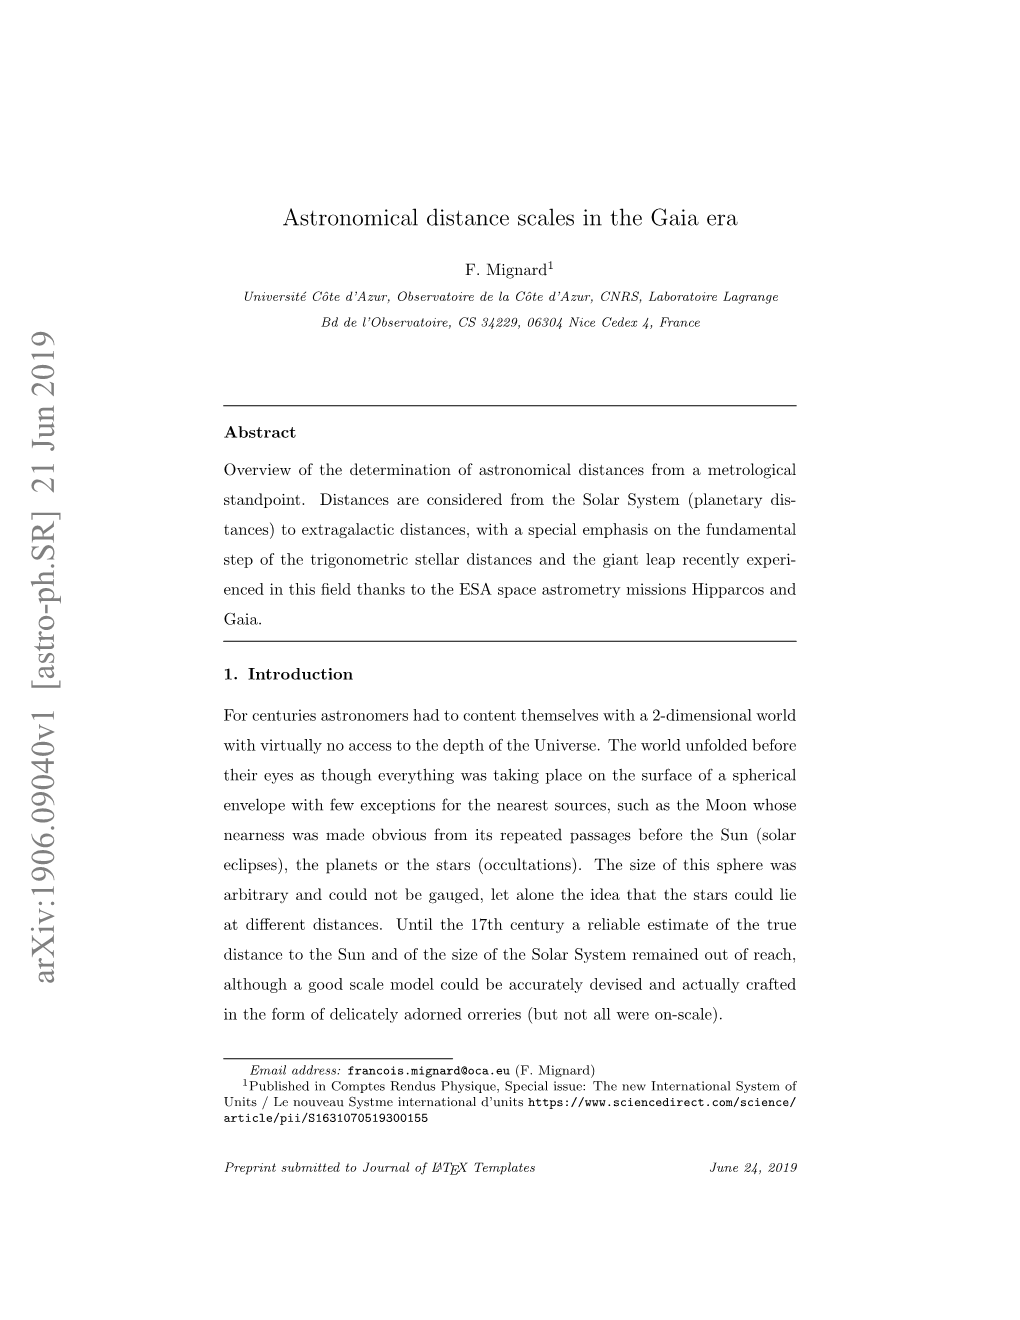 Astronomical Distance Scales in the Gaia Era